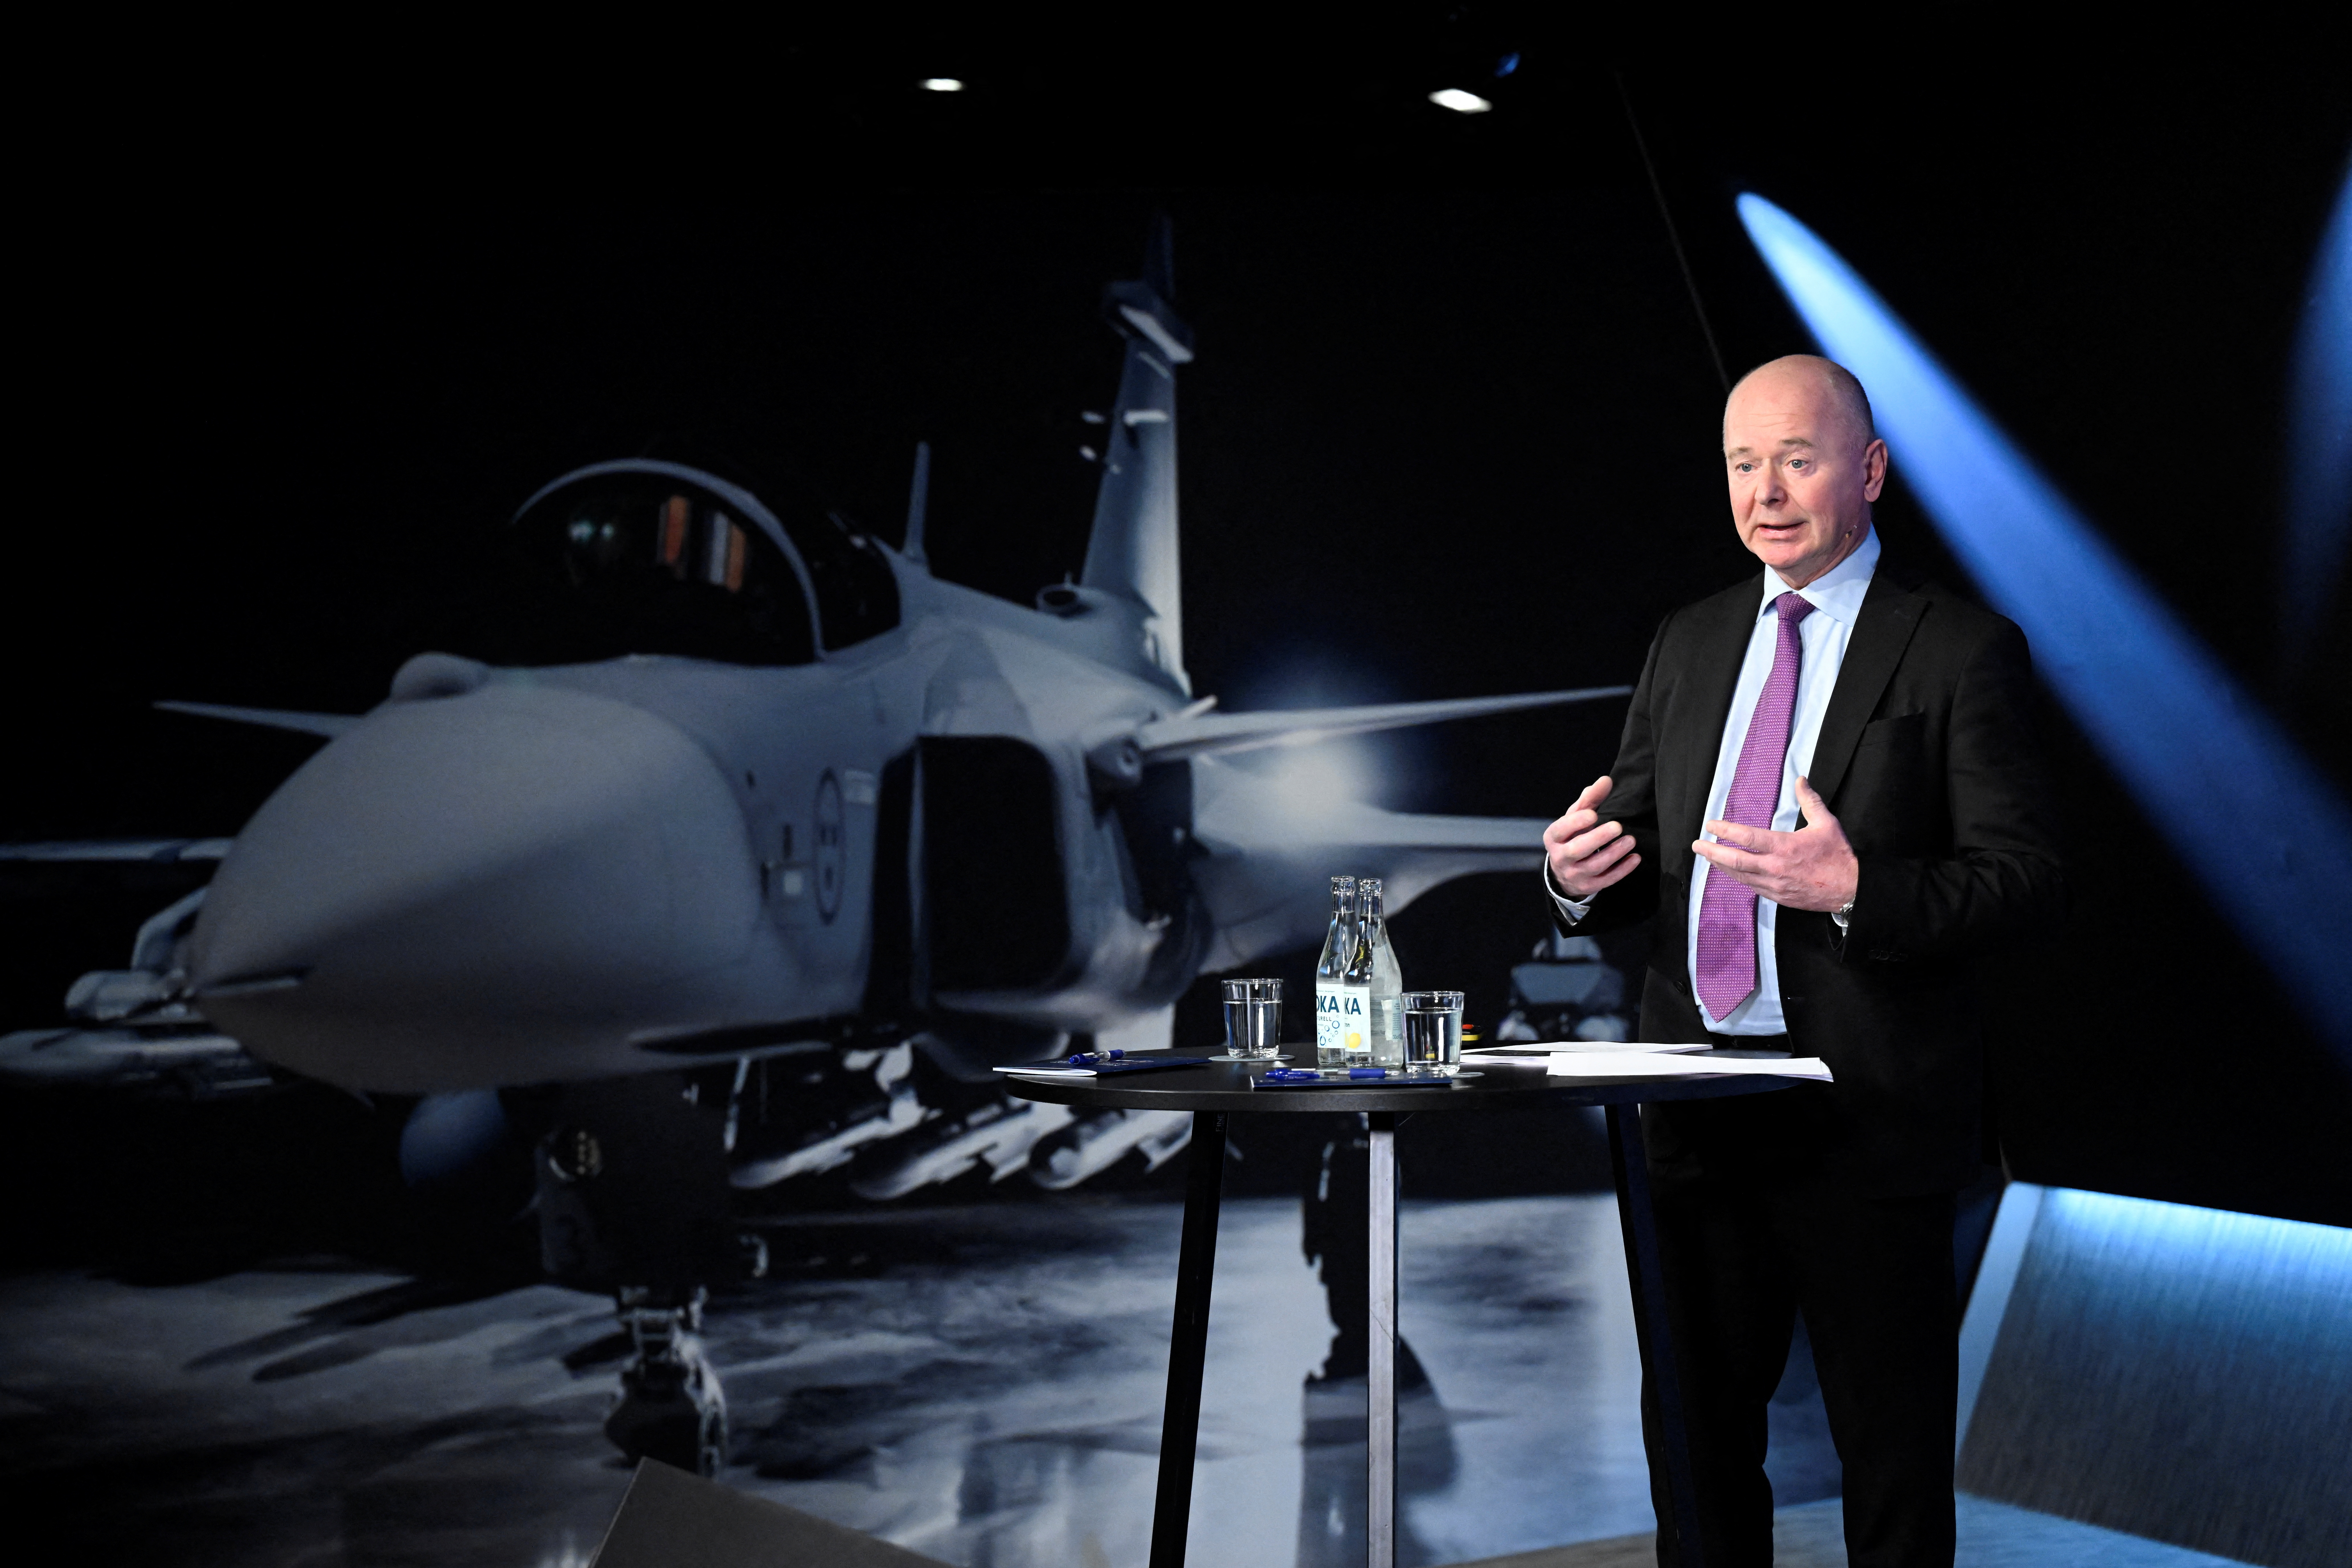 Swedish defence and security company Saab CEO Micael Johansson during the presentation of Saab's interim report in Stockholm